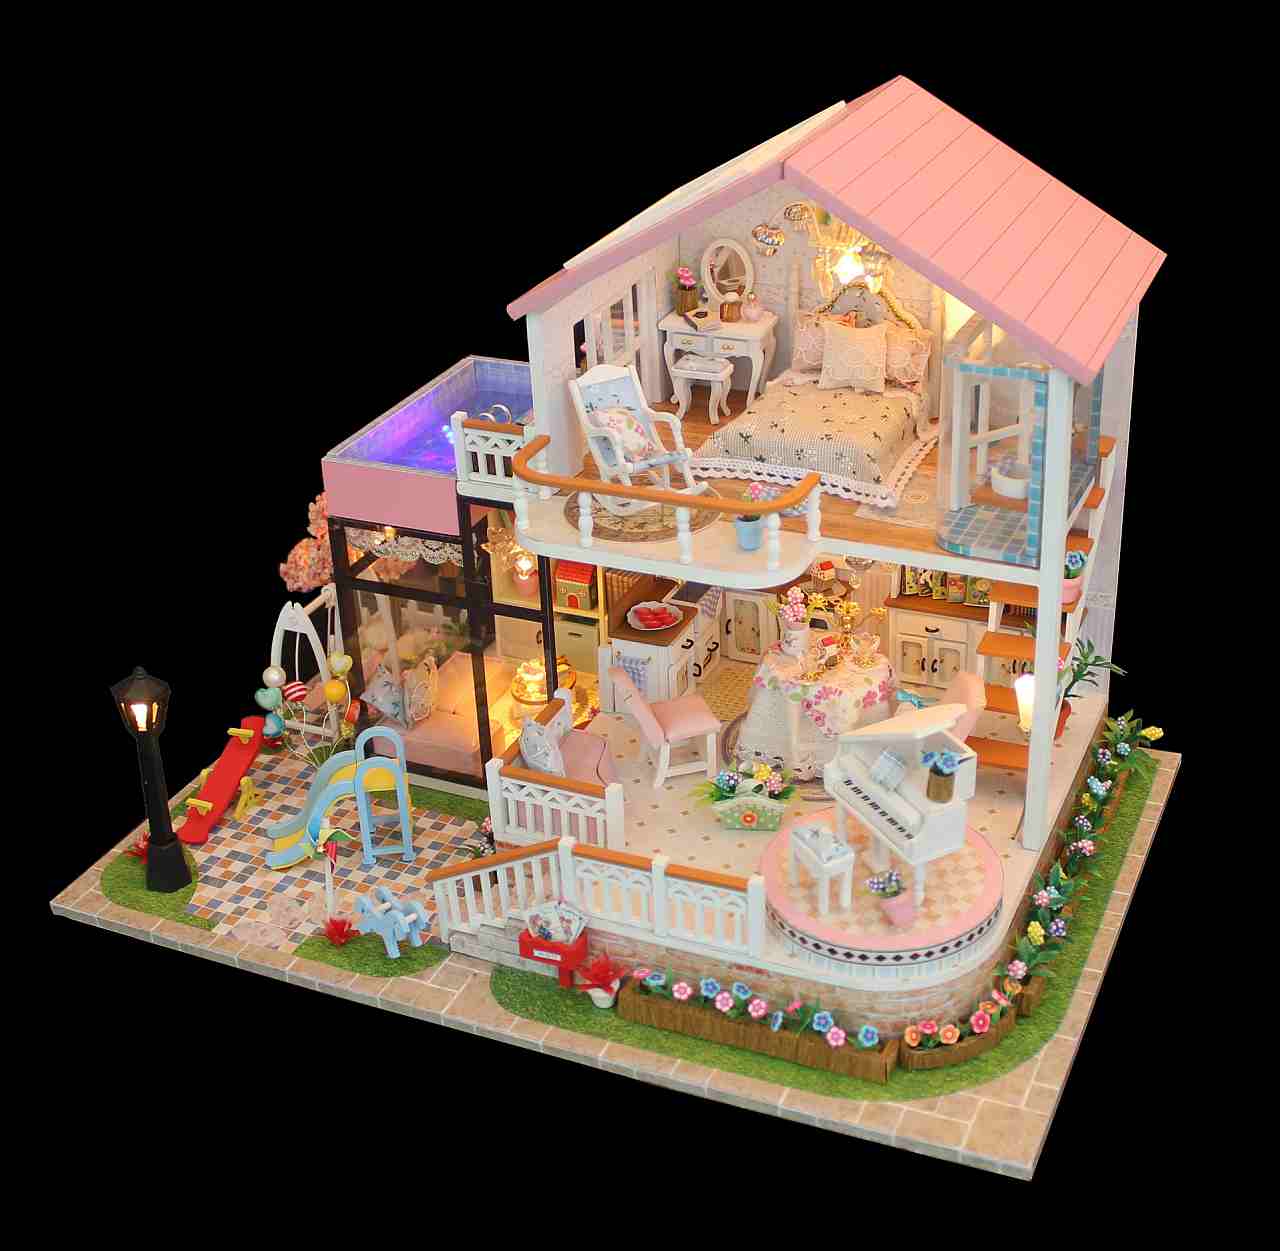 Miniature Dollhouse 13846 'Sweet Words‘ w/ Gues, LEDs and Remote Control Switch, Wooden Miniature Doll House, Handmade Gifts Birthday Presents